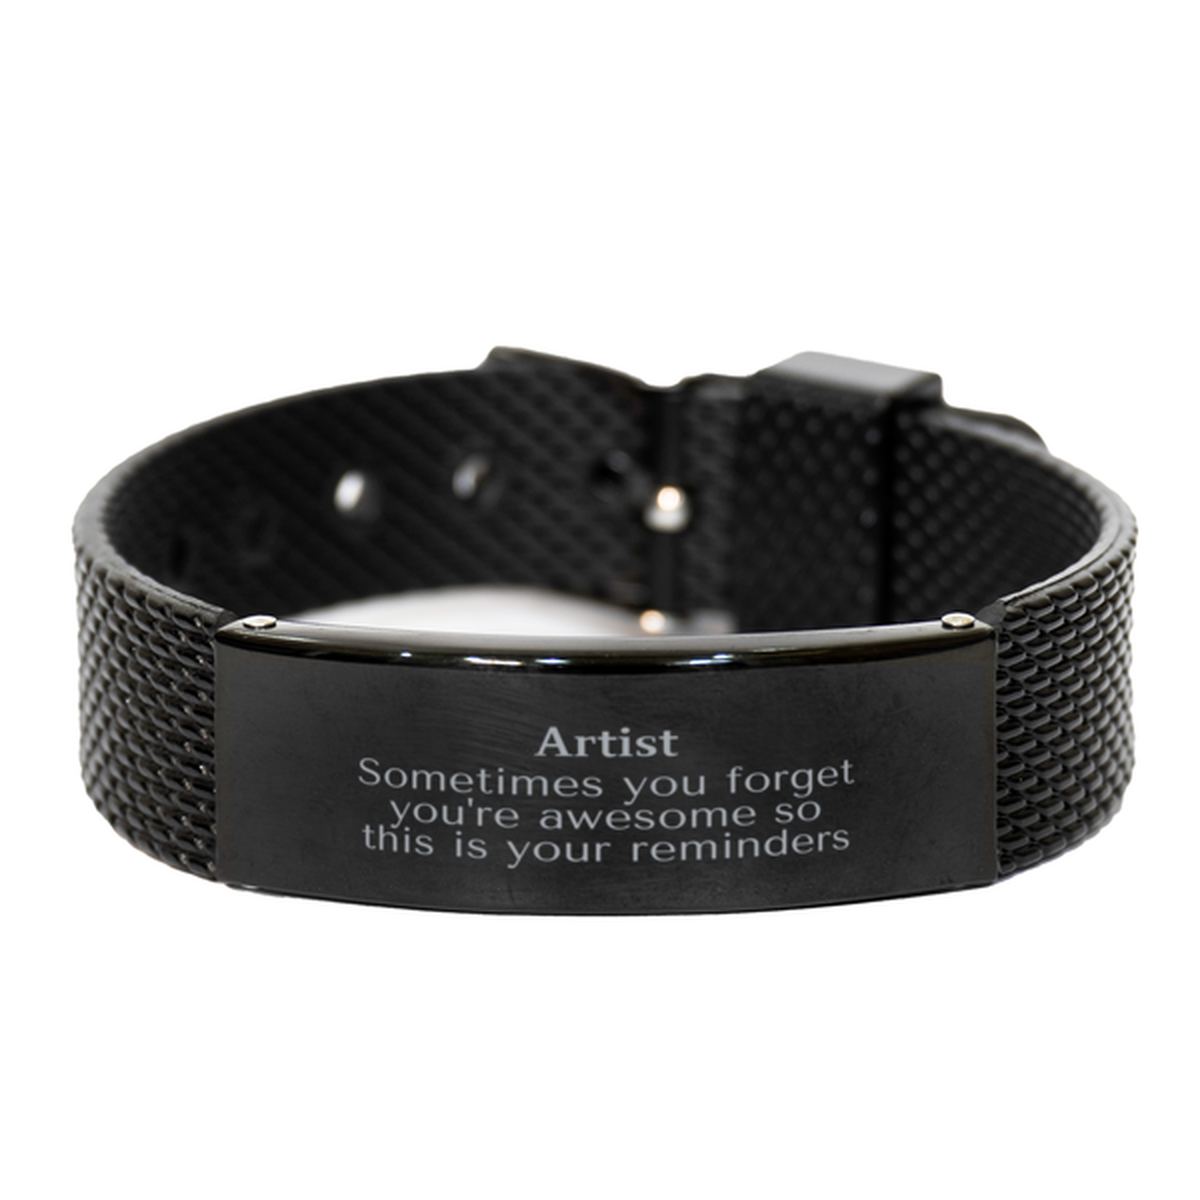 Sentimental Artist Black Shark Mesh Bracelet, Artist Sometimes you forget you're awesome so this is your reminders, Graduation Christmas Birthday Gifts for Artist, Men, Women, Coworkers